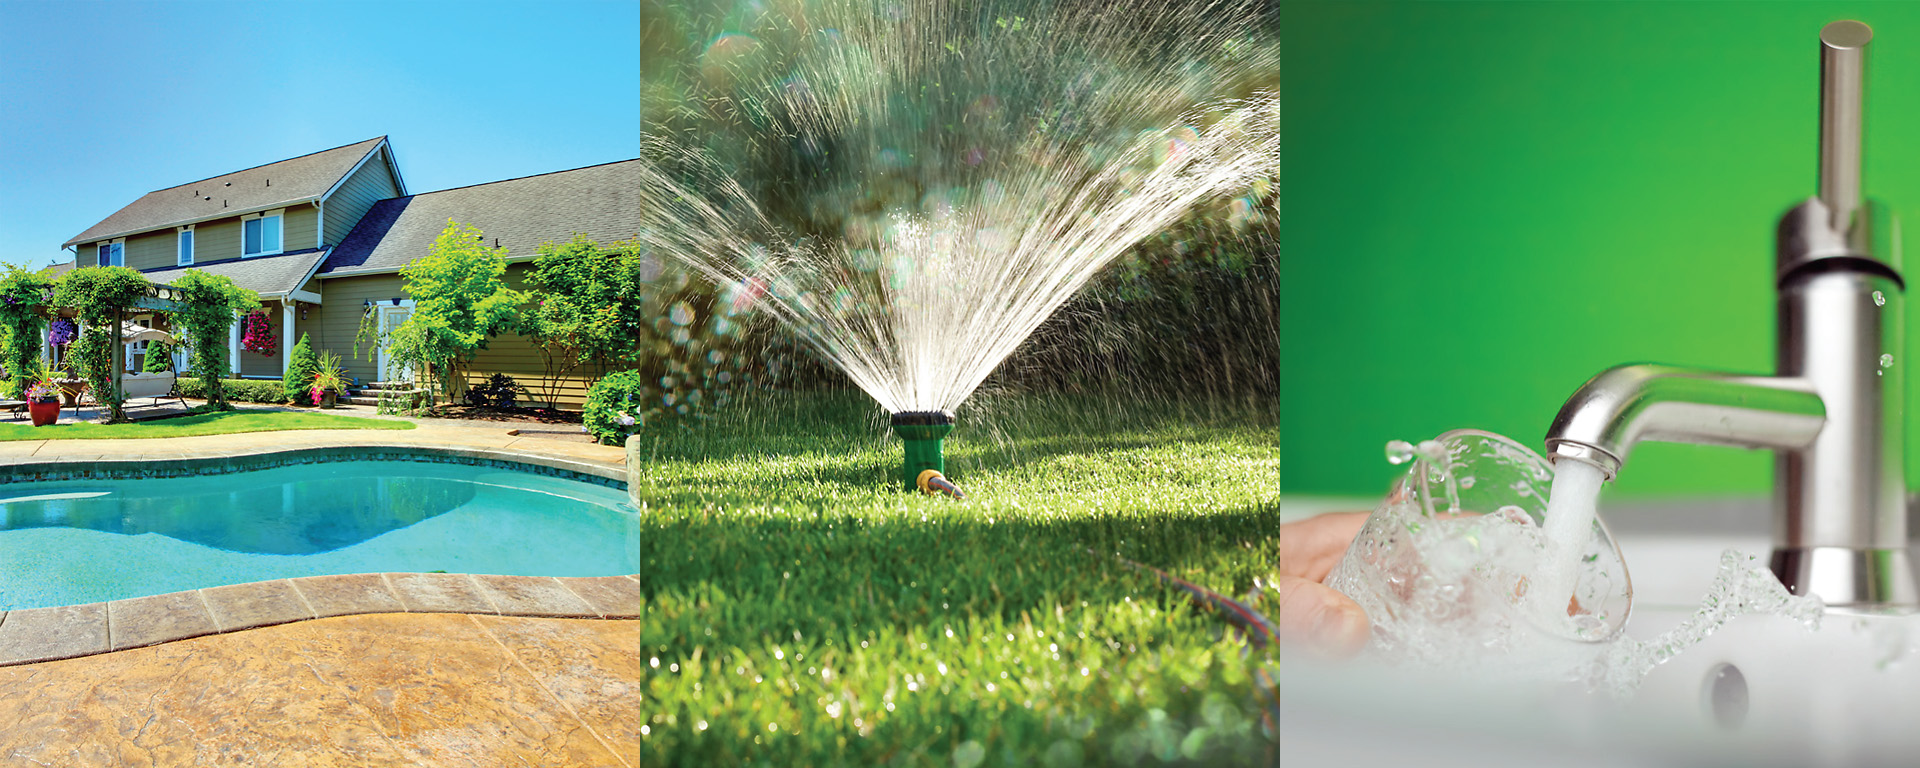 Three images side by side, showing a swimming pool, a lawn sprinkler and a running faucet 